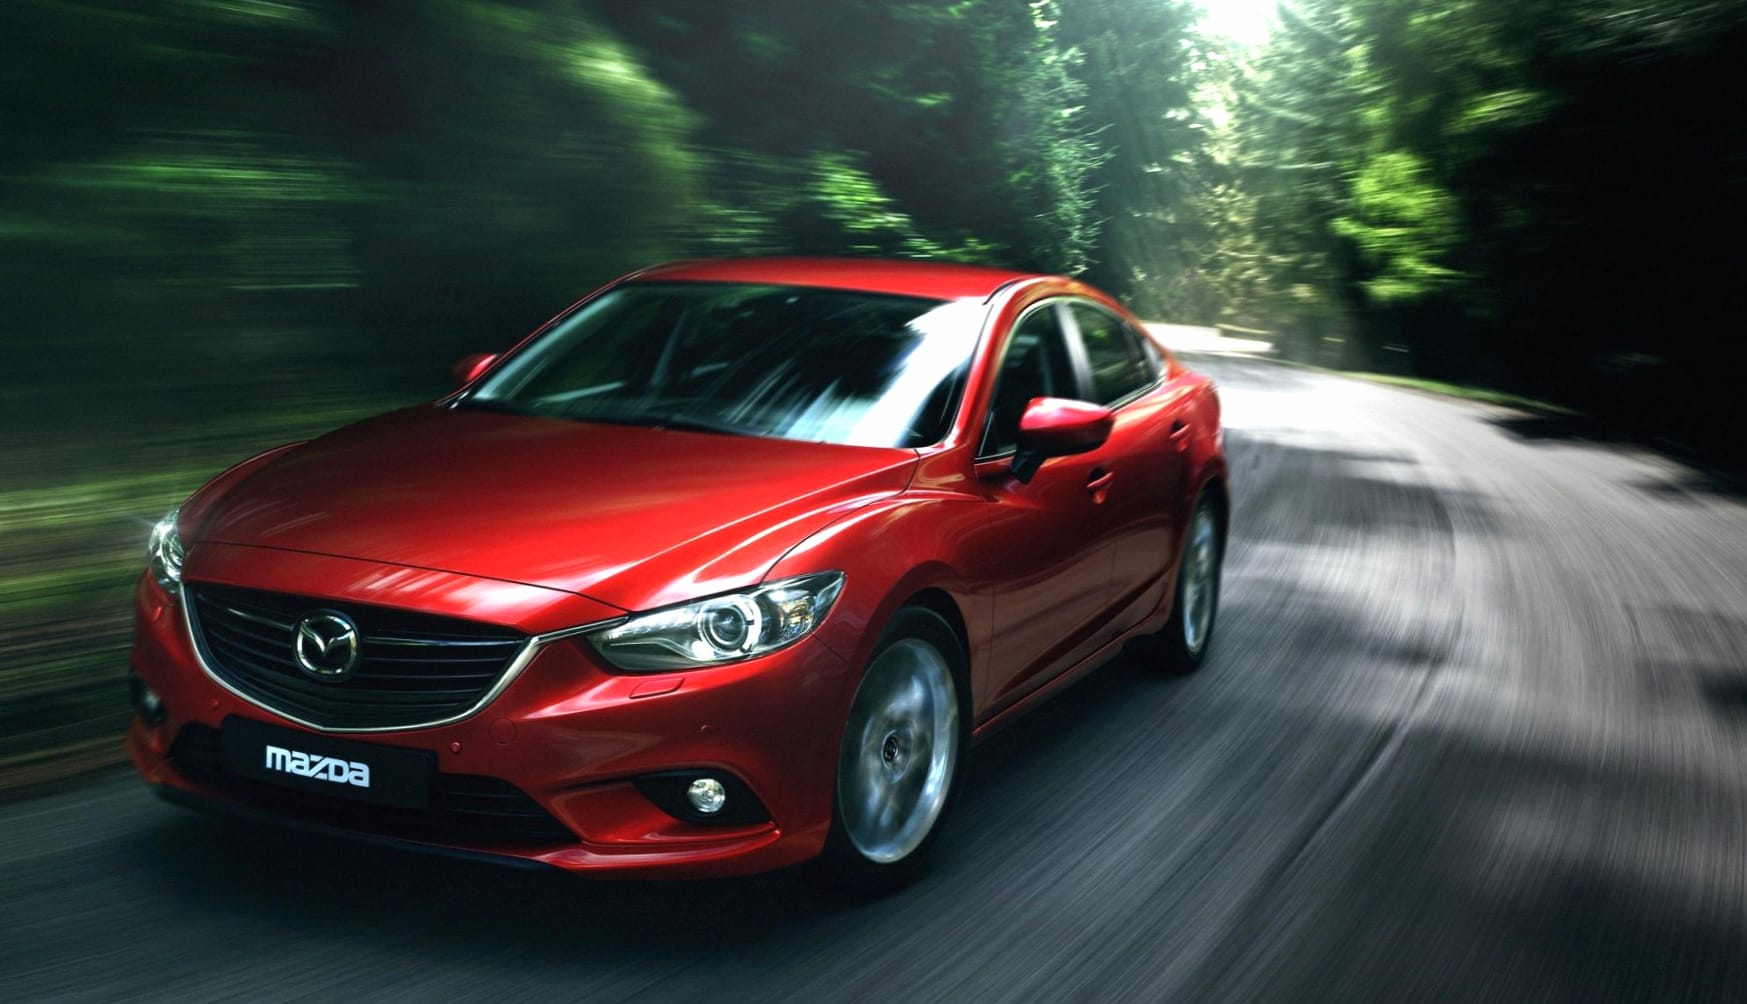 Mazda 6 wallpapers HD quality